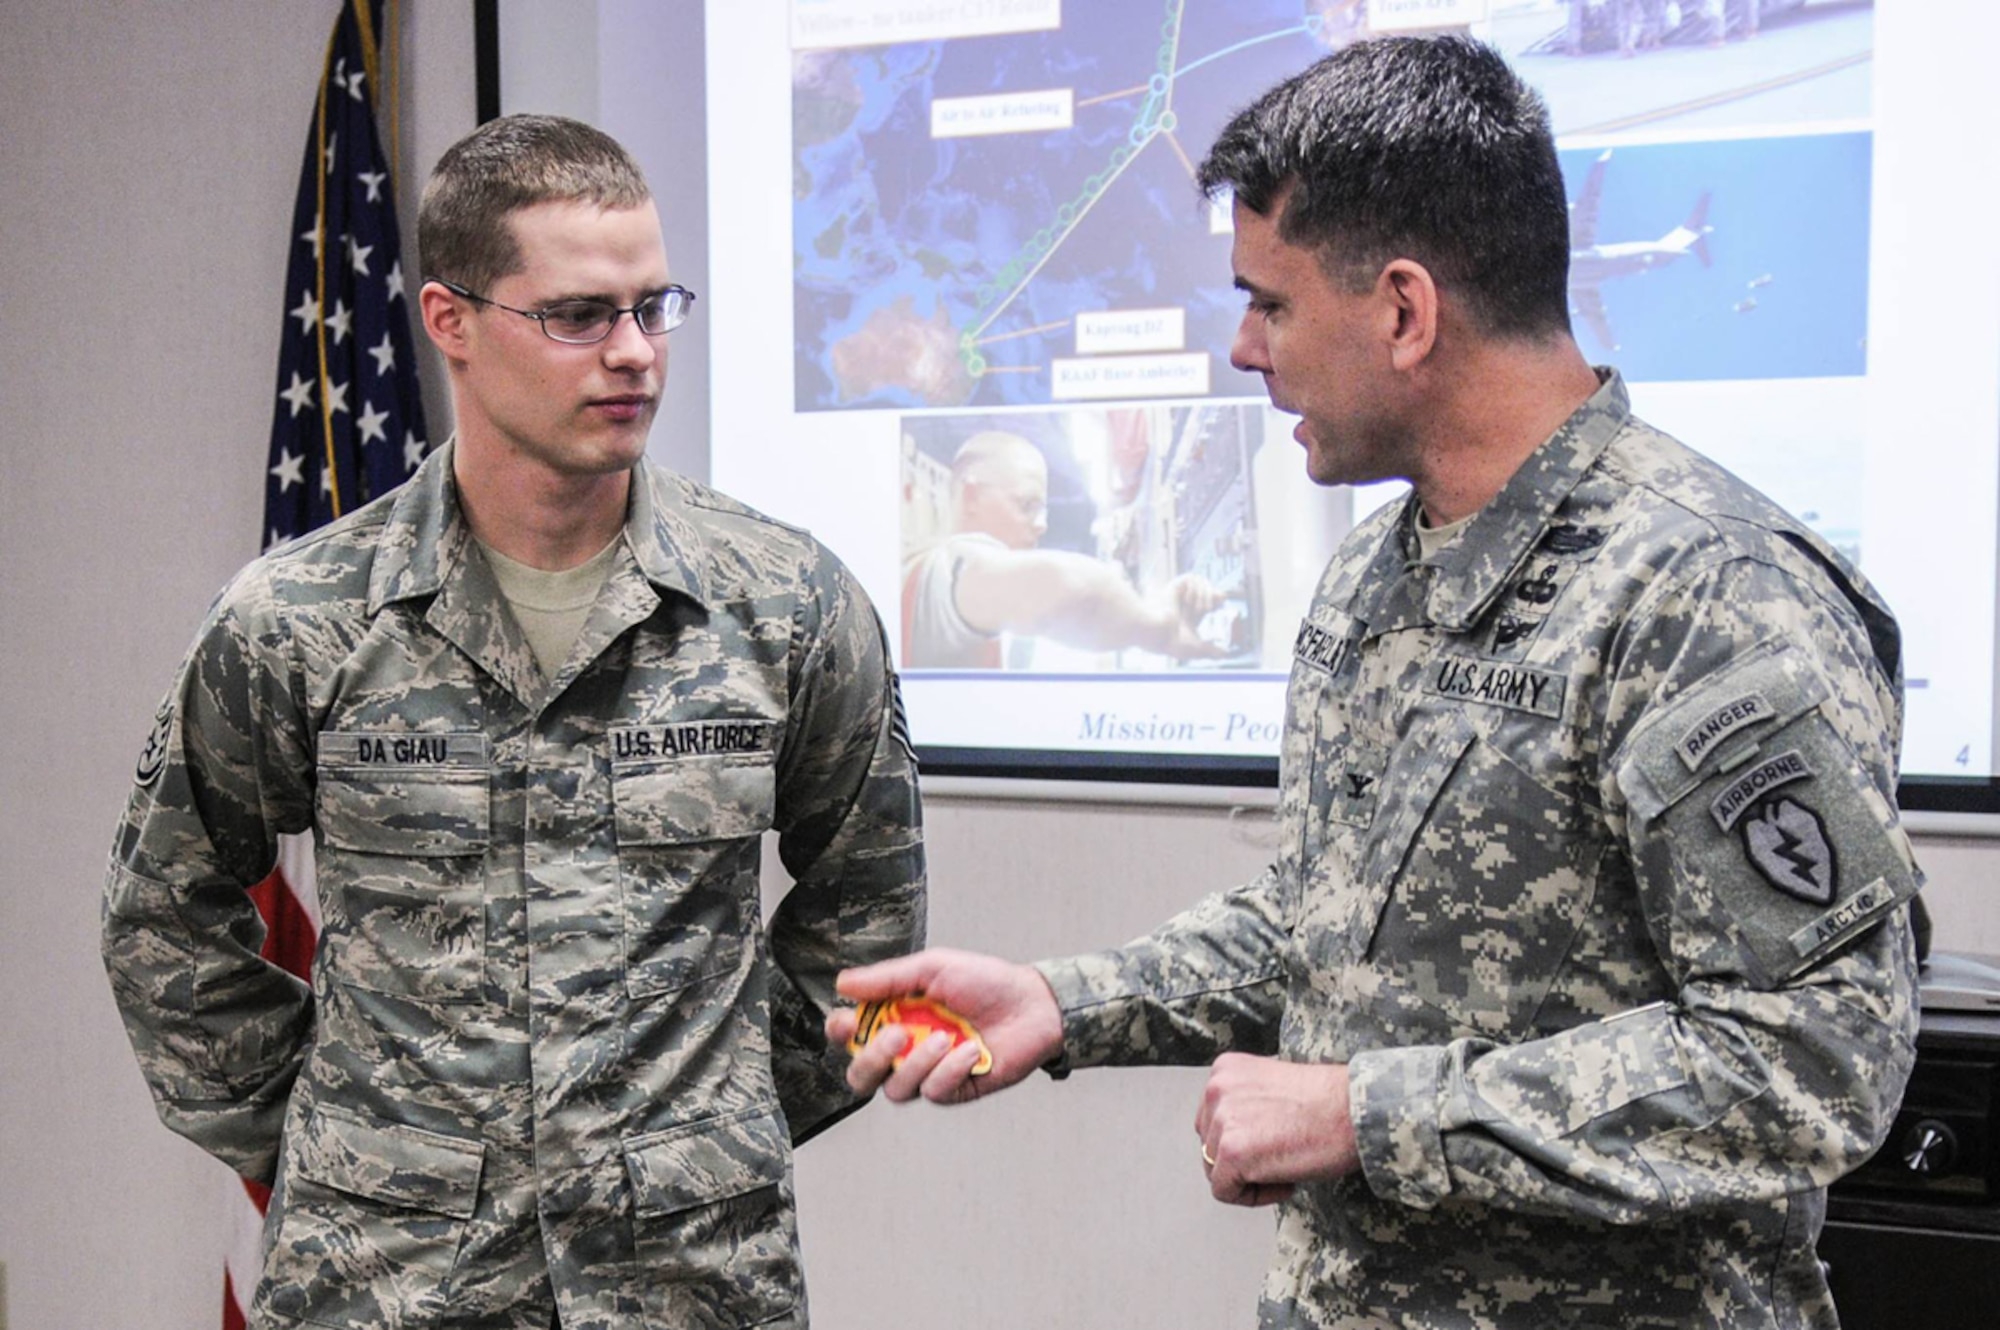 Army Col. Matthew McFarlane, commander of the 4th Brigade Combat Team (Airborne), 25th Infantry Division, presents Air Force SSgt. Todd DaGiau, an Air Transportation Specialist assigned to 732nd Mobility Squadron, a Spartan Brigade coin on Joint Base Elmendorf-Richardson, November 24, 2013. DaGiau, a ten-year Air Force veteran and native of Plains, Mont., was recognized for his timely actions during Talisman Saber. (Courtesy photo)